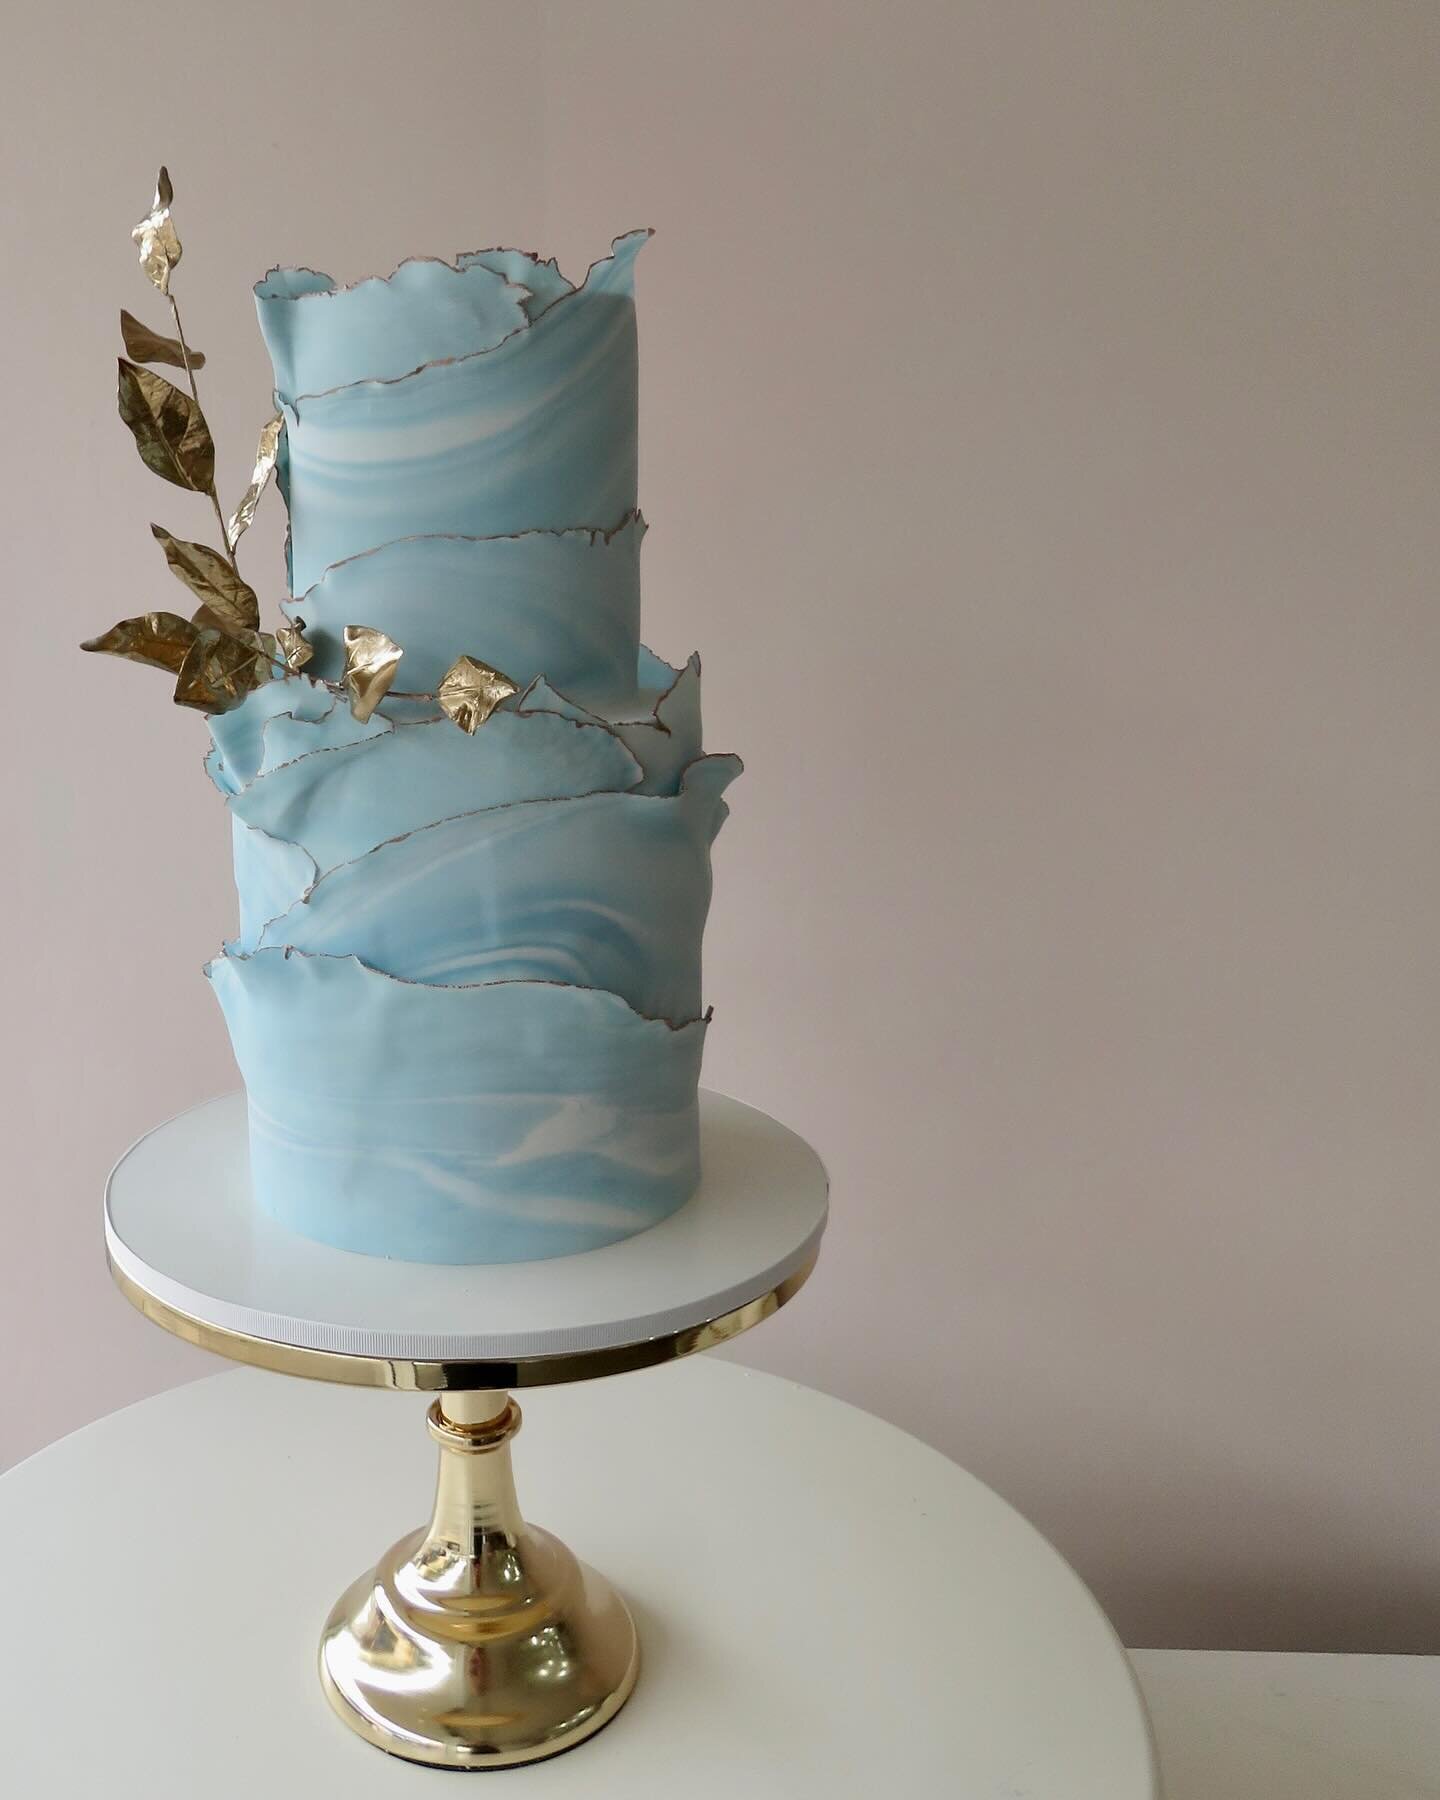 Three of my cakes are featured on @polkadotwedding &ldquo;something blue&rdquo; gallery
Head to their page for a link to the full gallery 
.
#sydneyweddingcakes